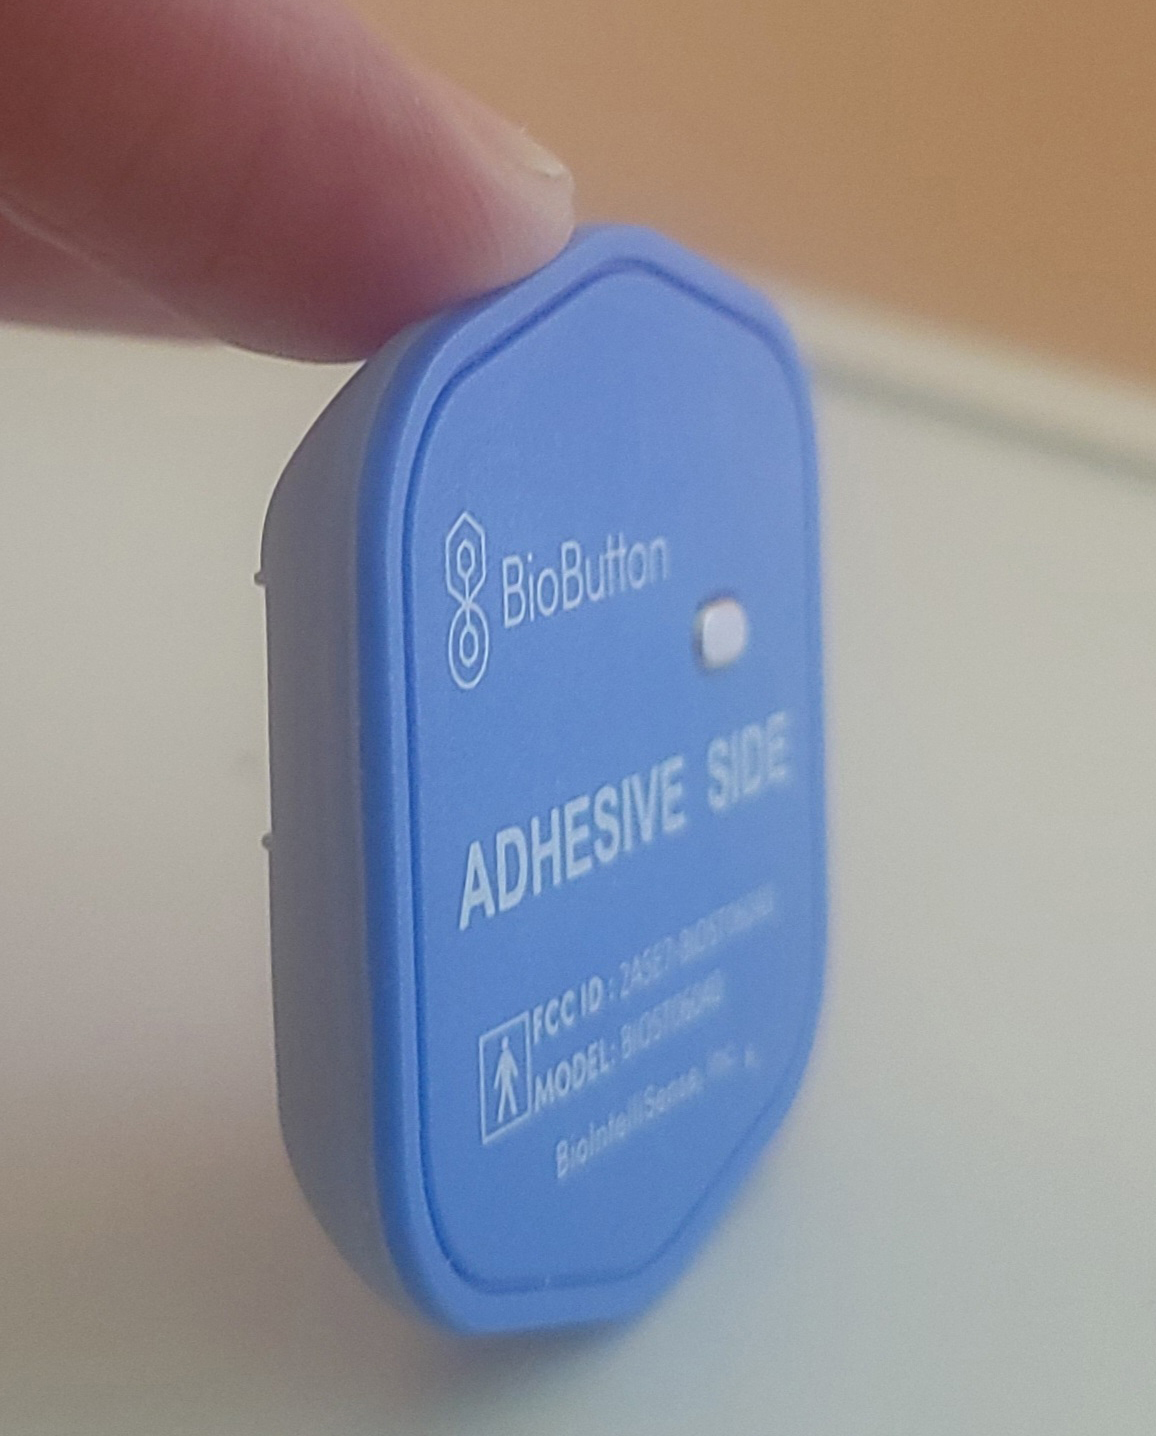 A photo of a BioButton being held up by a finger.